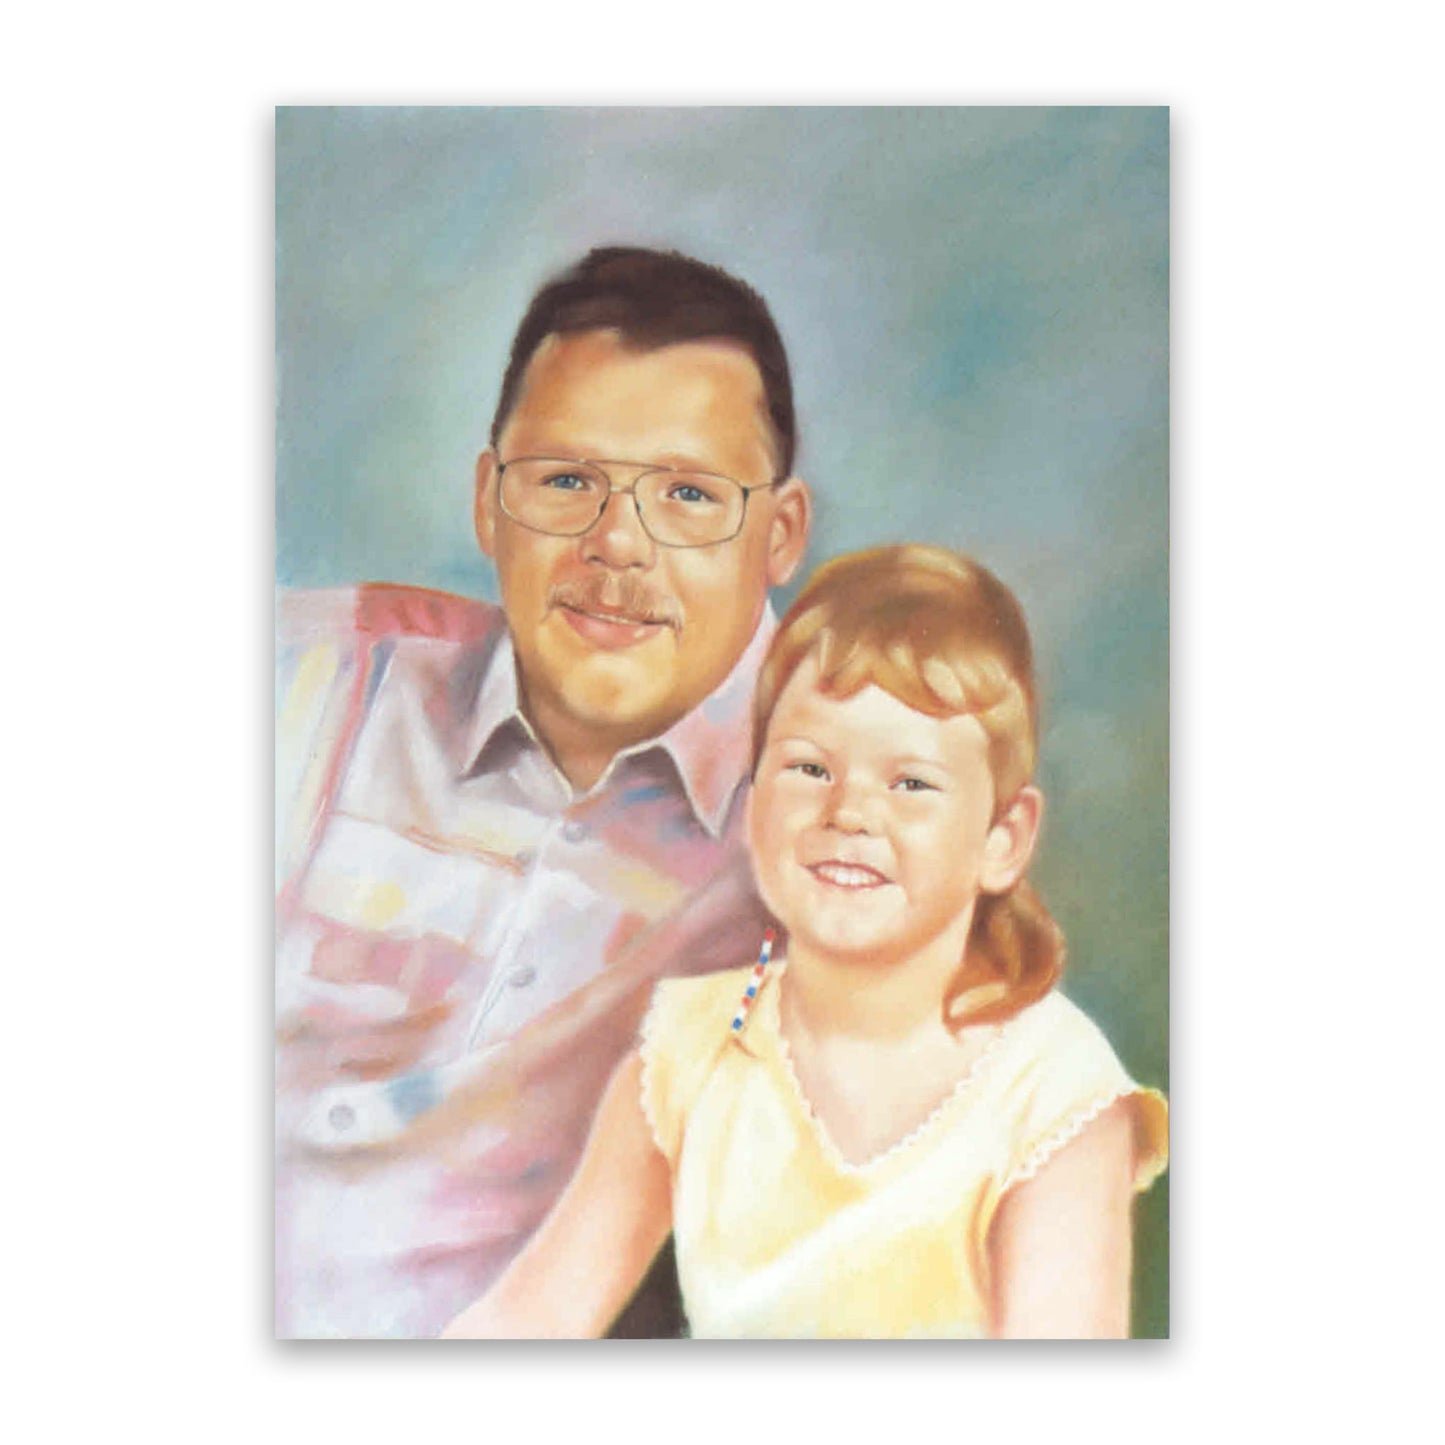 Family pastel portrait of a father and daughter. The dad is wearing a pink-white shirt and thin dark-rimmed glasses. He has blue eyes, brown hair, and a light moustache. The little girl has ginger hair, light brown eyes, and is wearing a light yellow dress. The portrait has a gray, blue, and green background where the colors blend together.